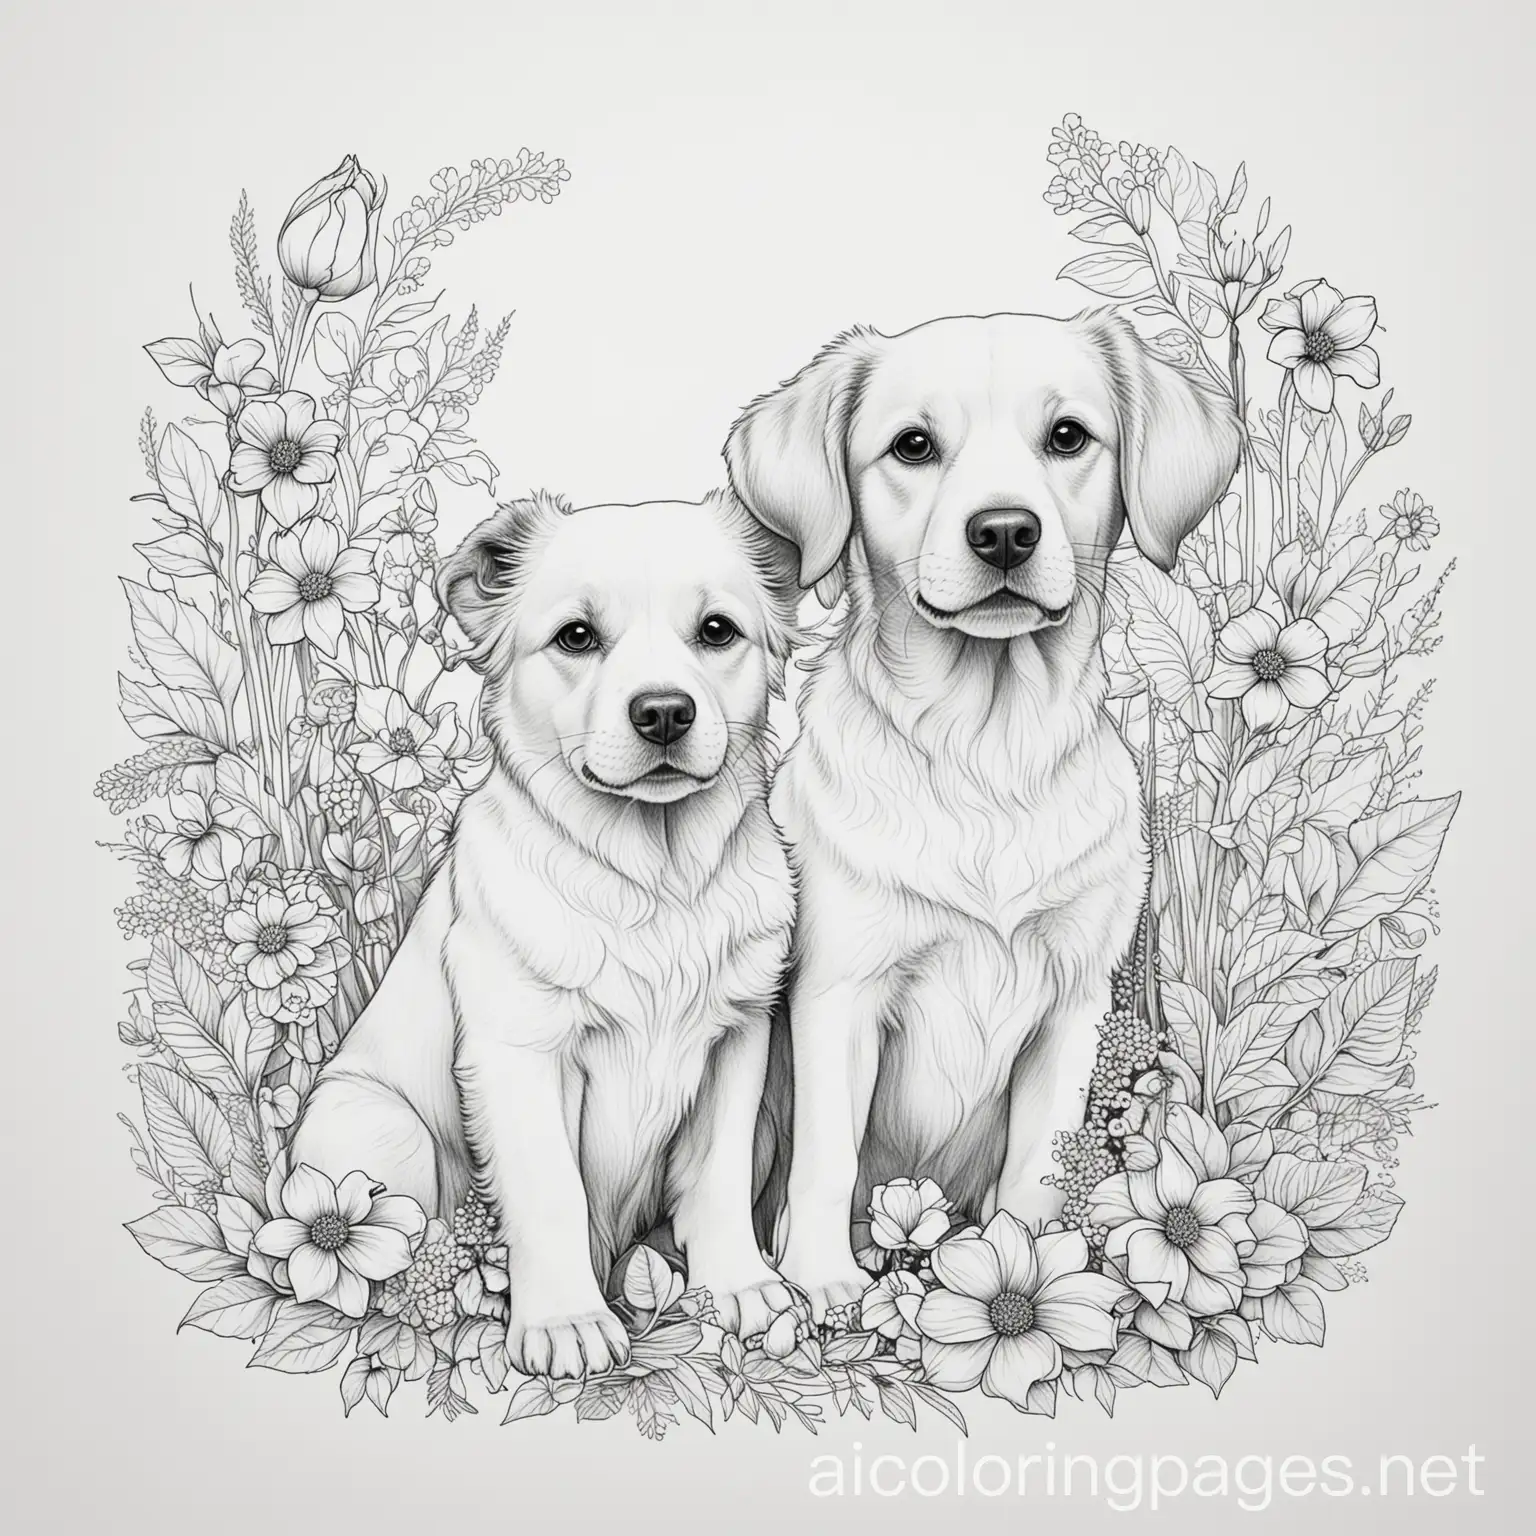 Flower-and-Dog-Coloring-Page-Simple-Line-Art-on-White-Background